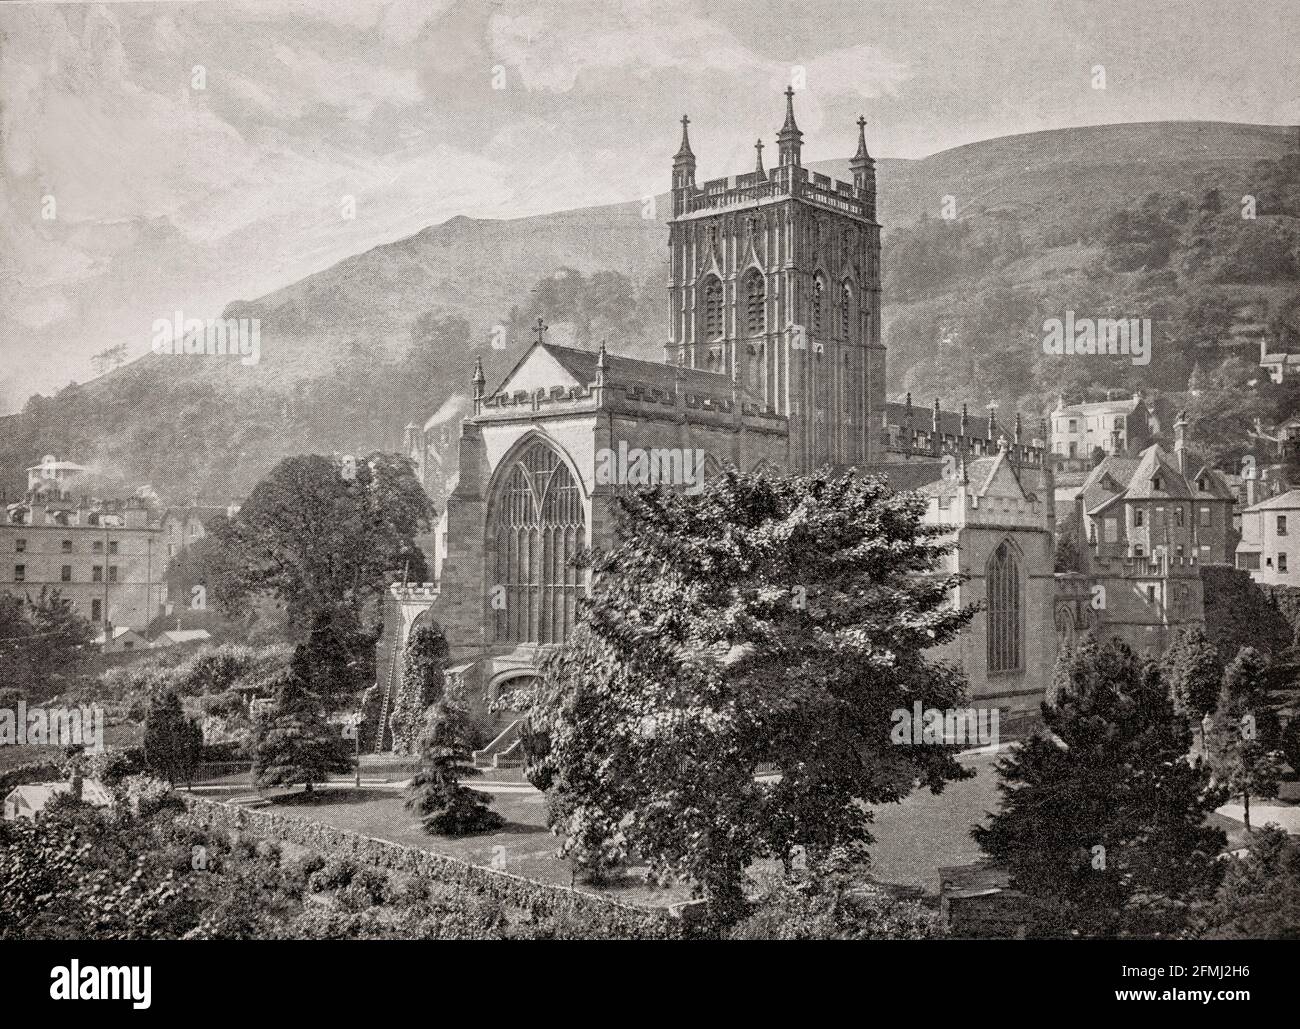 A late 19th Century view of Great Malvern Priory in Malvern, Worcestershire, England, formerly a Benedictine monastery it's now an Anglican parish church. The present building dates from 1085, with mainly 15th-century structure, floor, and wall tiles. Extensions to the original Norman architecture church began around 1440 in the Perpendicular style and work continued until 1502. In 1860 major restoration work was carried out by Sir George Gilbert Scott. Stock Photo